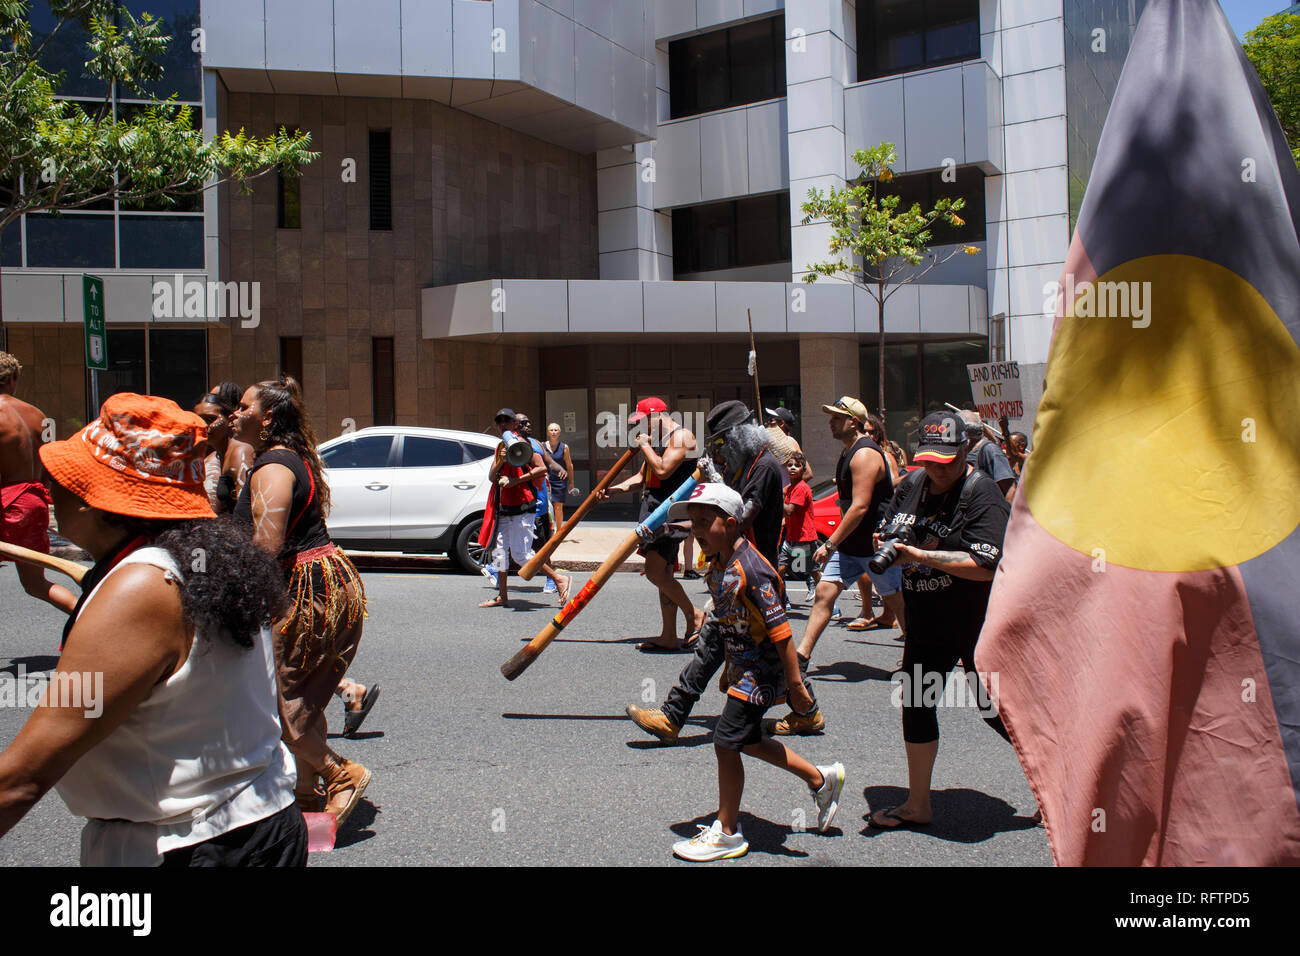 Protesters continue to chant at the 26th January 2019 Meanjin (Brisbane) Invasion Day protest.  On the 26th of January, many Australians celebrate Australia day, but to many indigenous Australian people, it is a day synonymous with decades of systematic abuse and genocide. Several thousand protesters took the streets in Brisbane (known as Meanjin by local indigenous people) to rally for sovereignty rights and date changes. Stock Photo